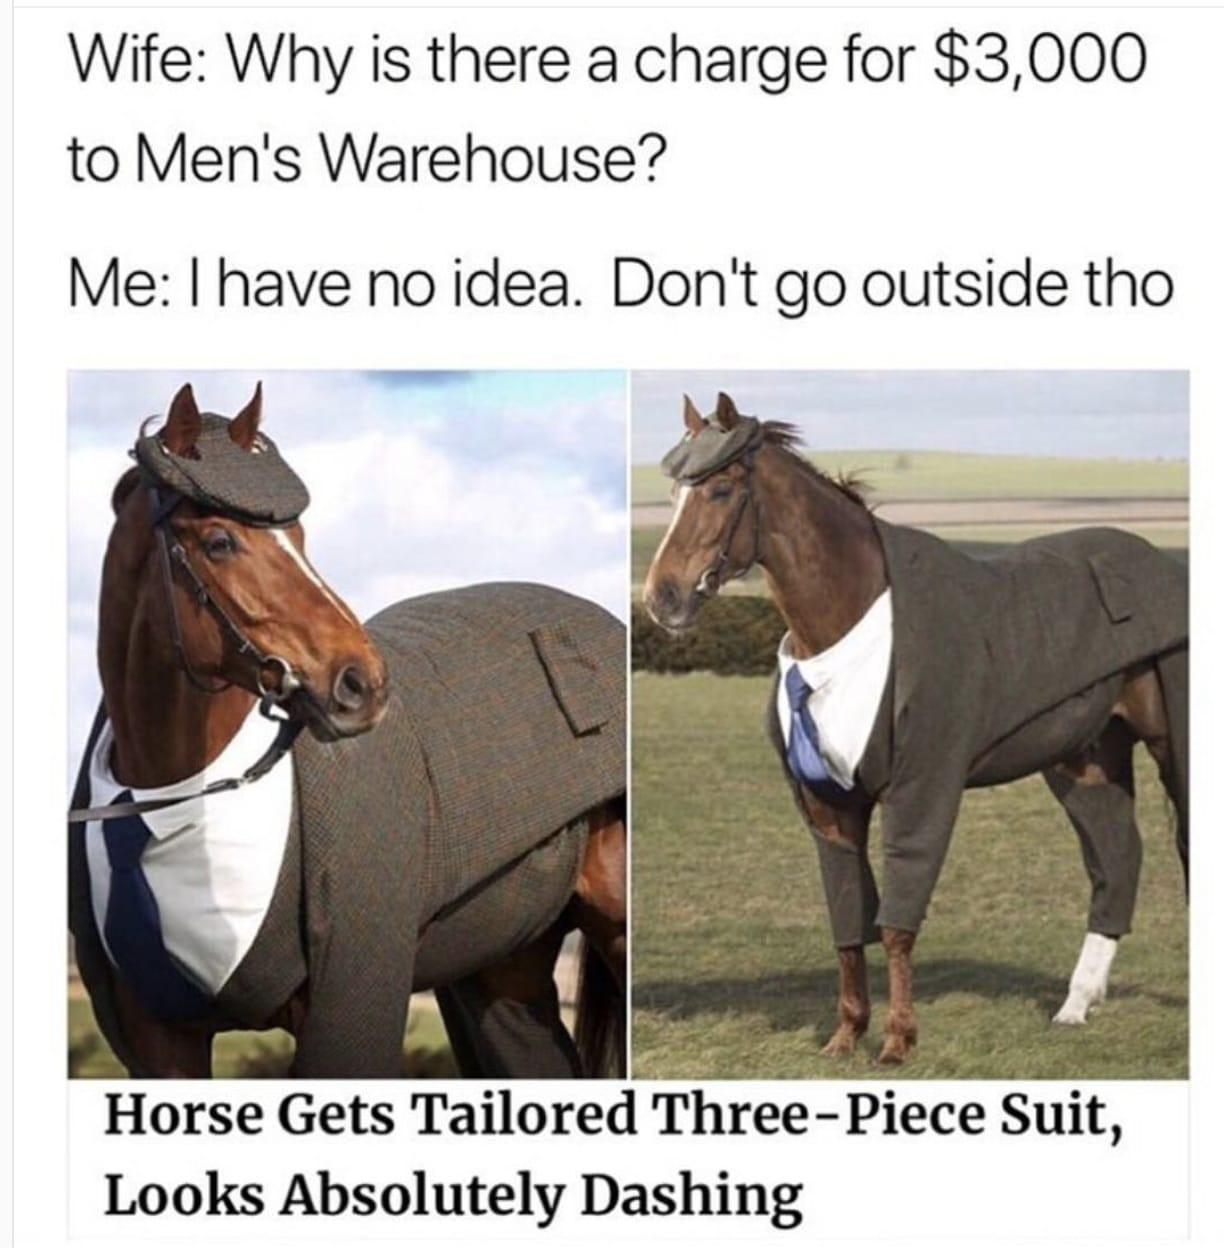 horse gets tailored 3 piece suit - Wife Why is there a charge for $3,000 to Men's Warehouse? Me I have no idea. Don't go outside tho Horse Gets Tailored ThreePiece Suit, Looks Absolutely Dashing